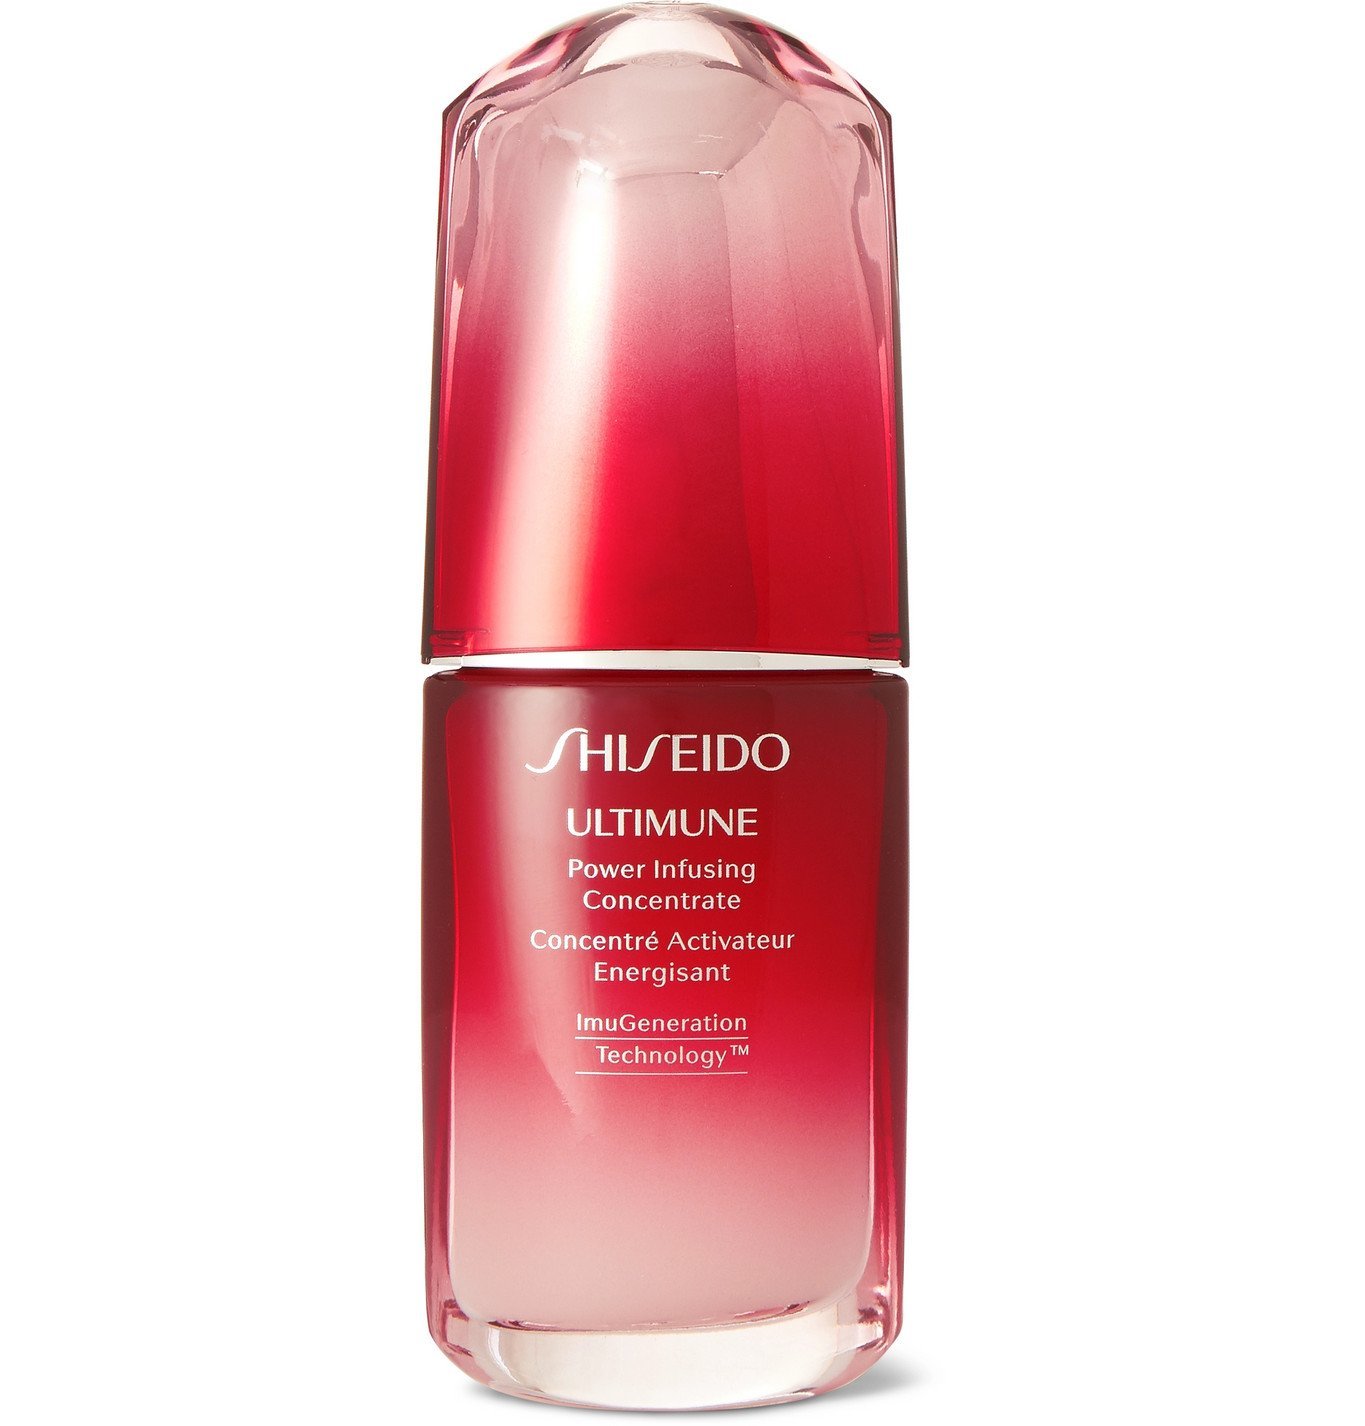 Shiseido ultimune power infusing concentrate. Shiseido Power infusing Concentrate. Shiseido Ultimune концентрат. Концентрат Shiseido Ultimune Power infusing Concentrate. Shiseido Ginza Tokyo крем.